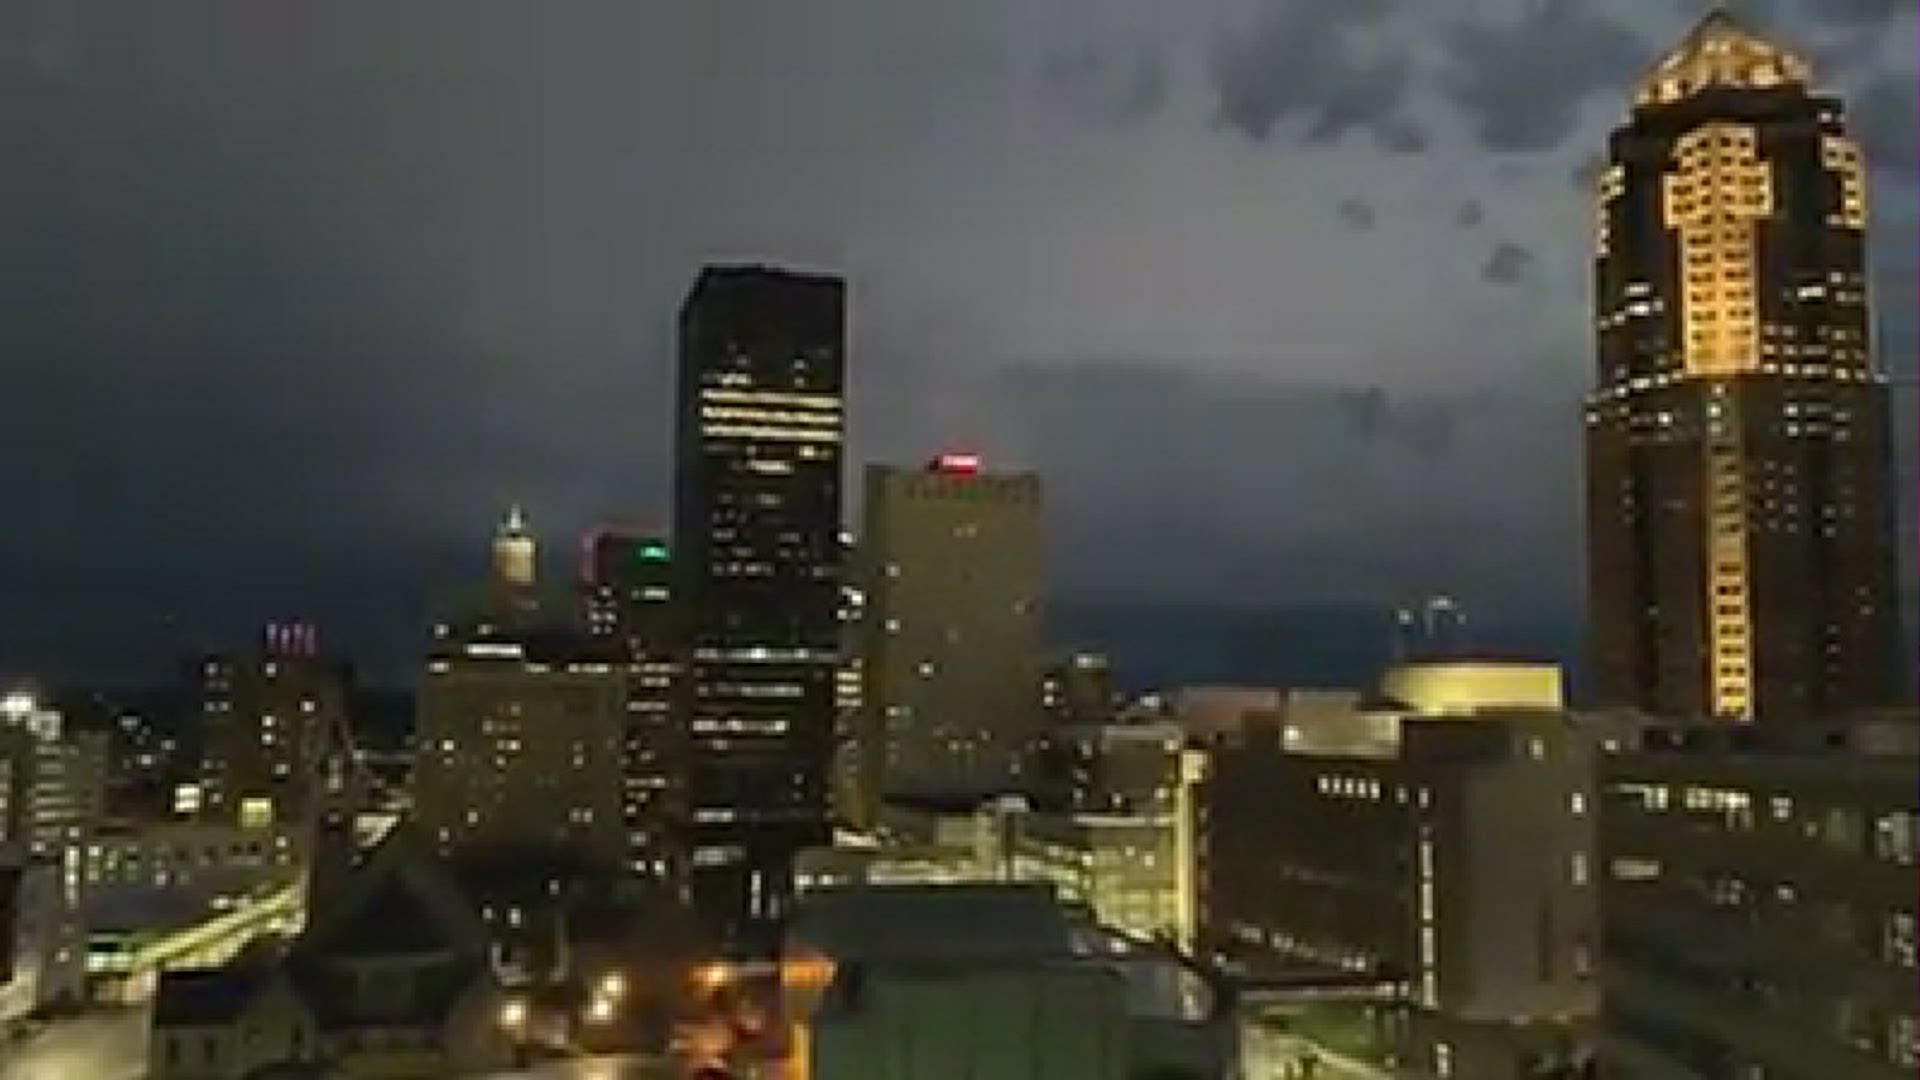 Lightning lit up the night sky in downtown Des Moines in July 2020